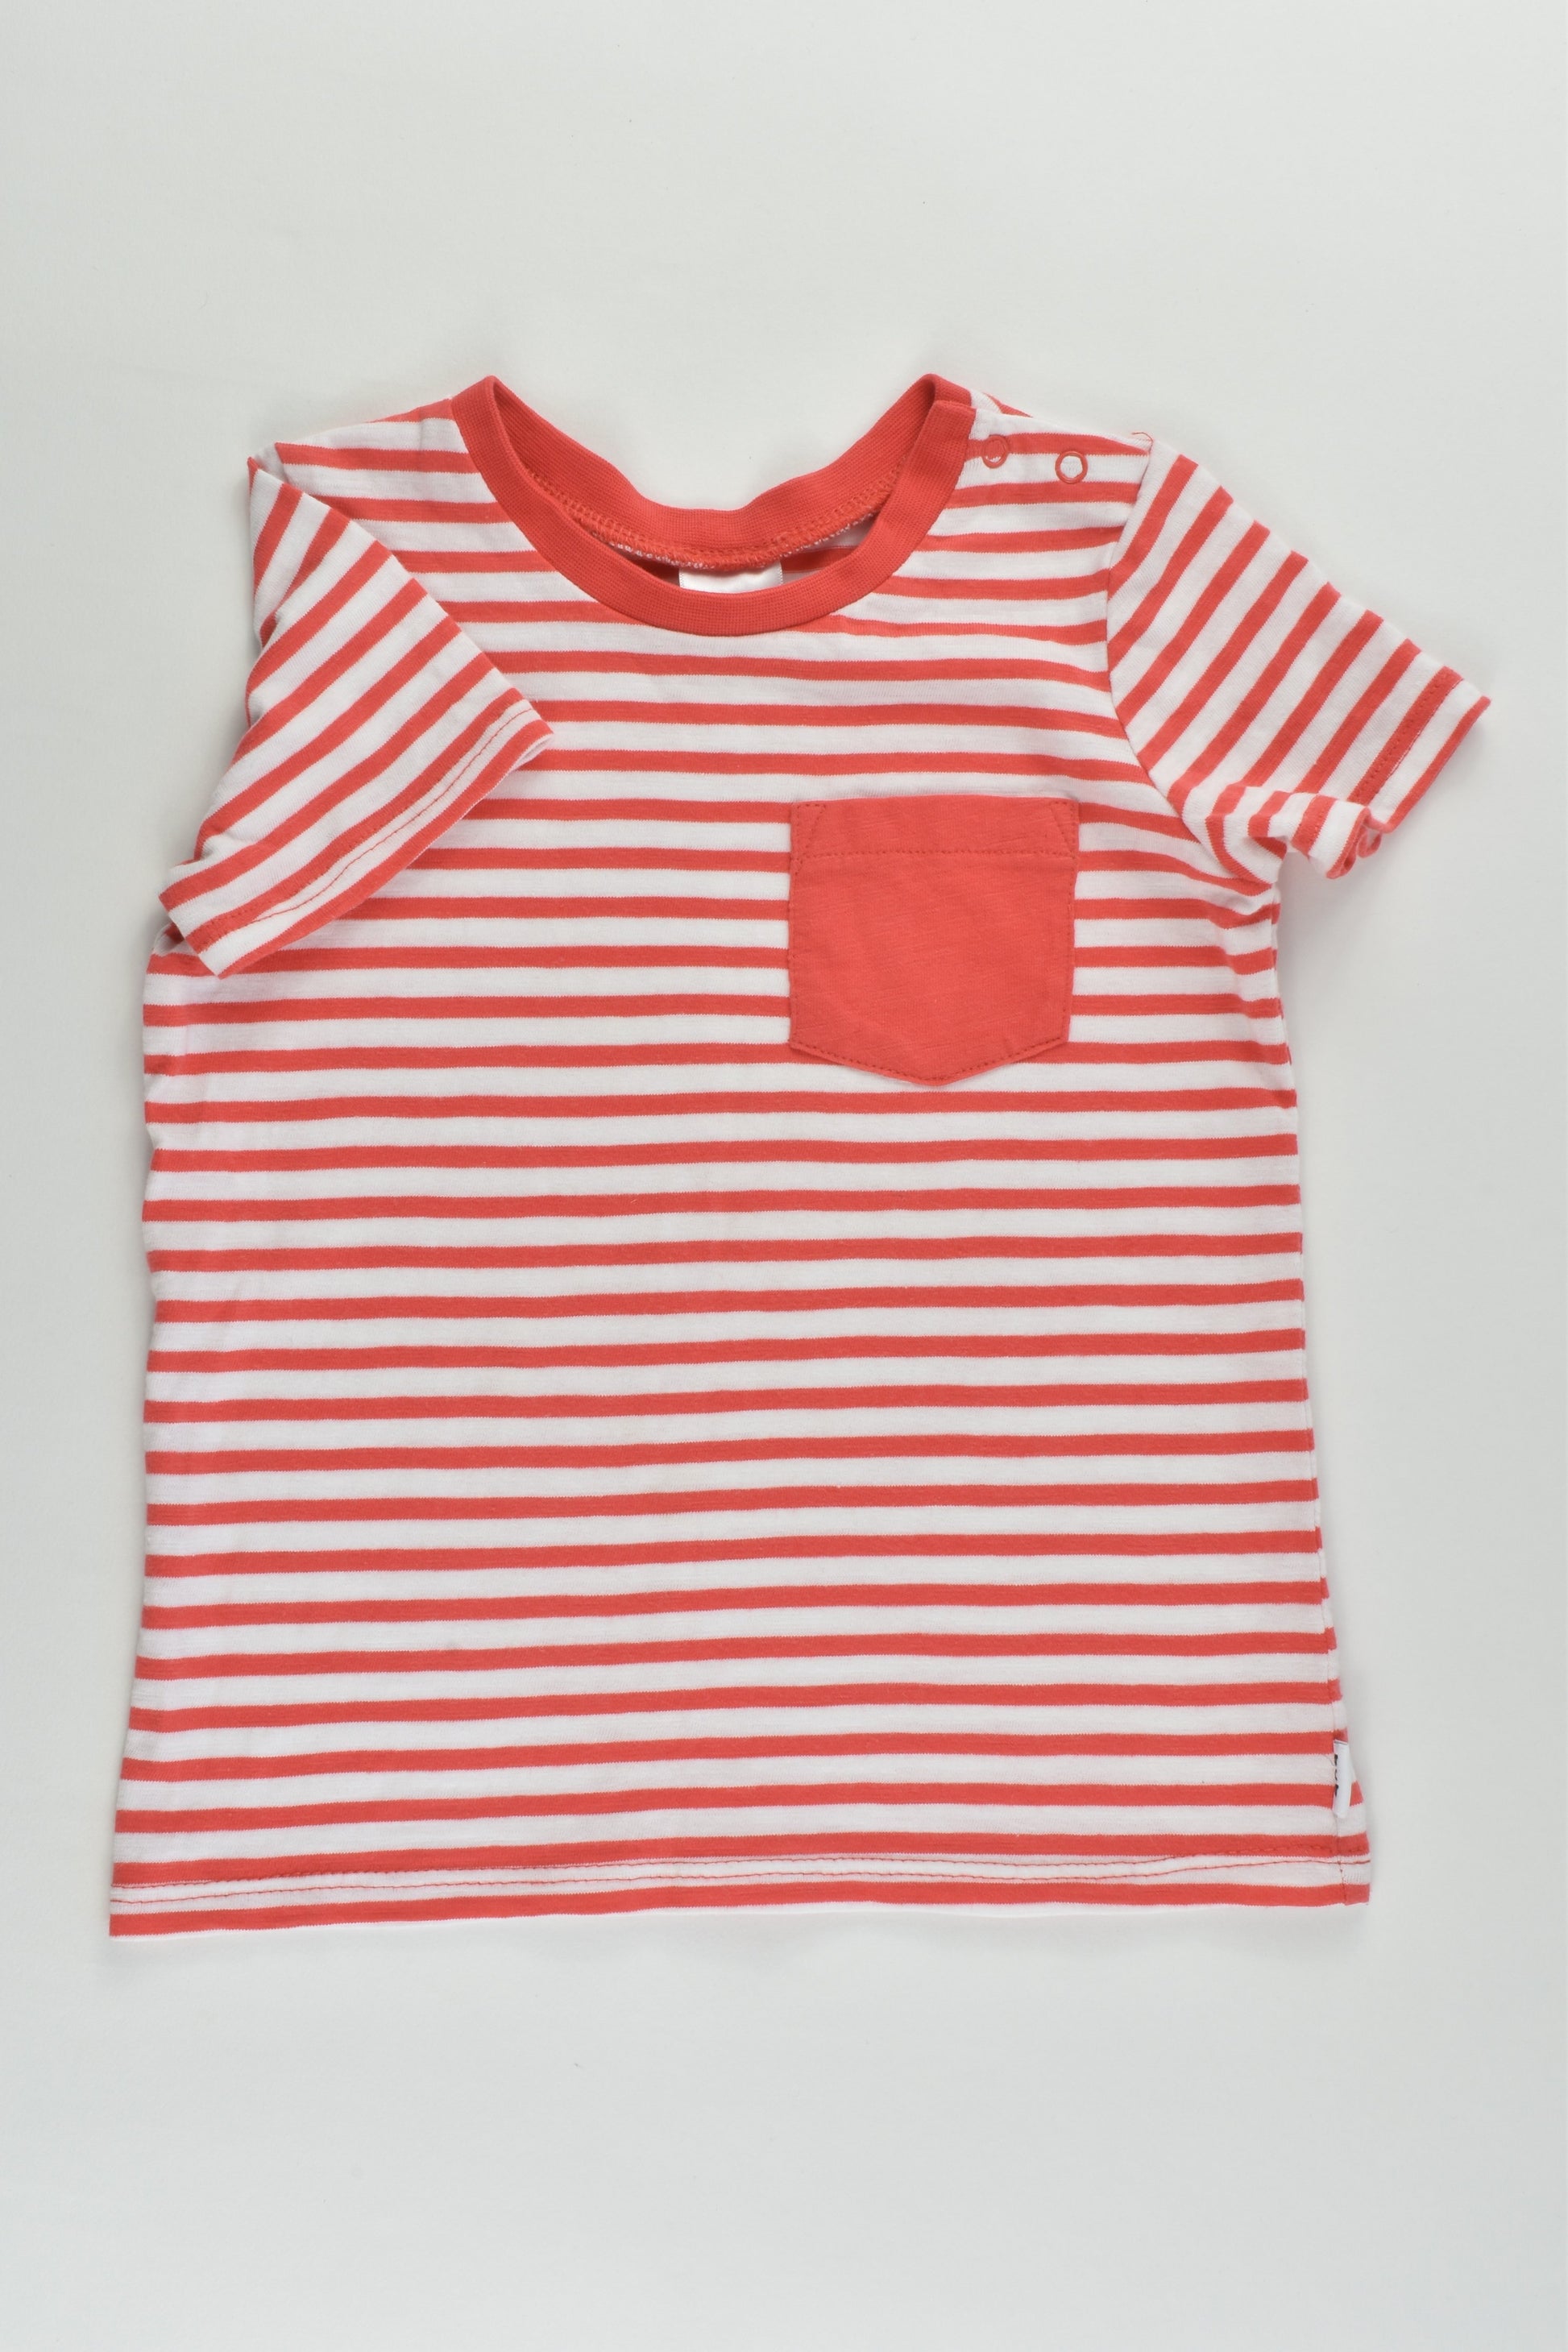 NEW Target Size 2 Striped T-shirt